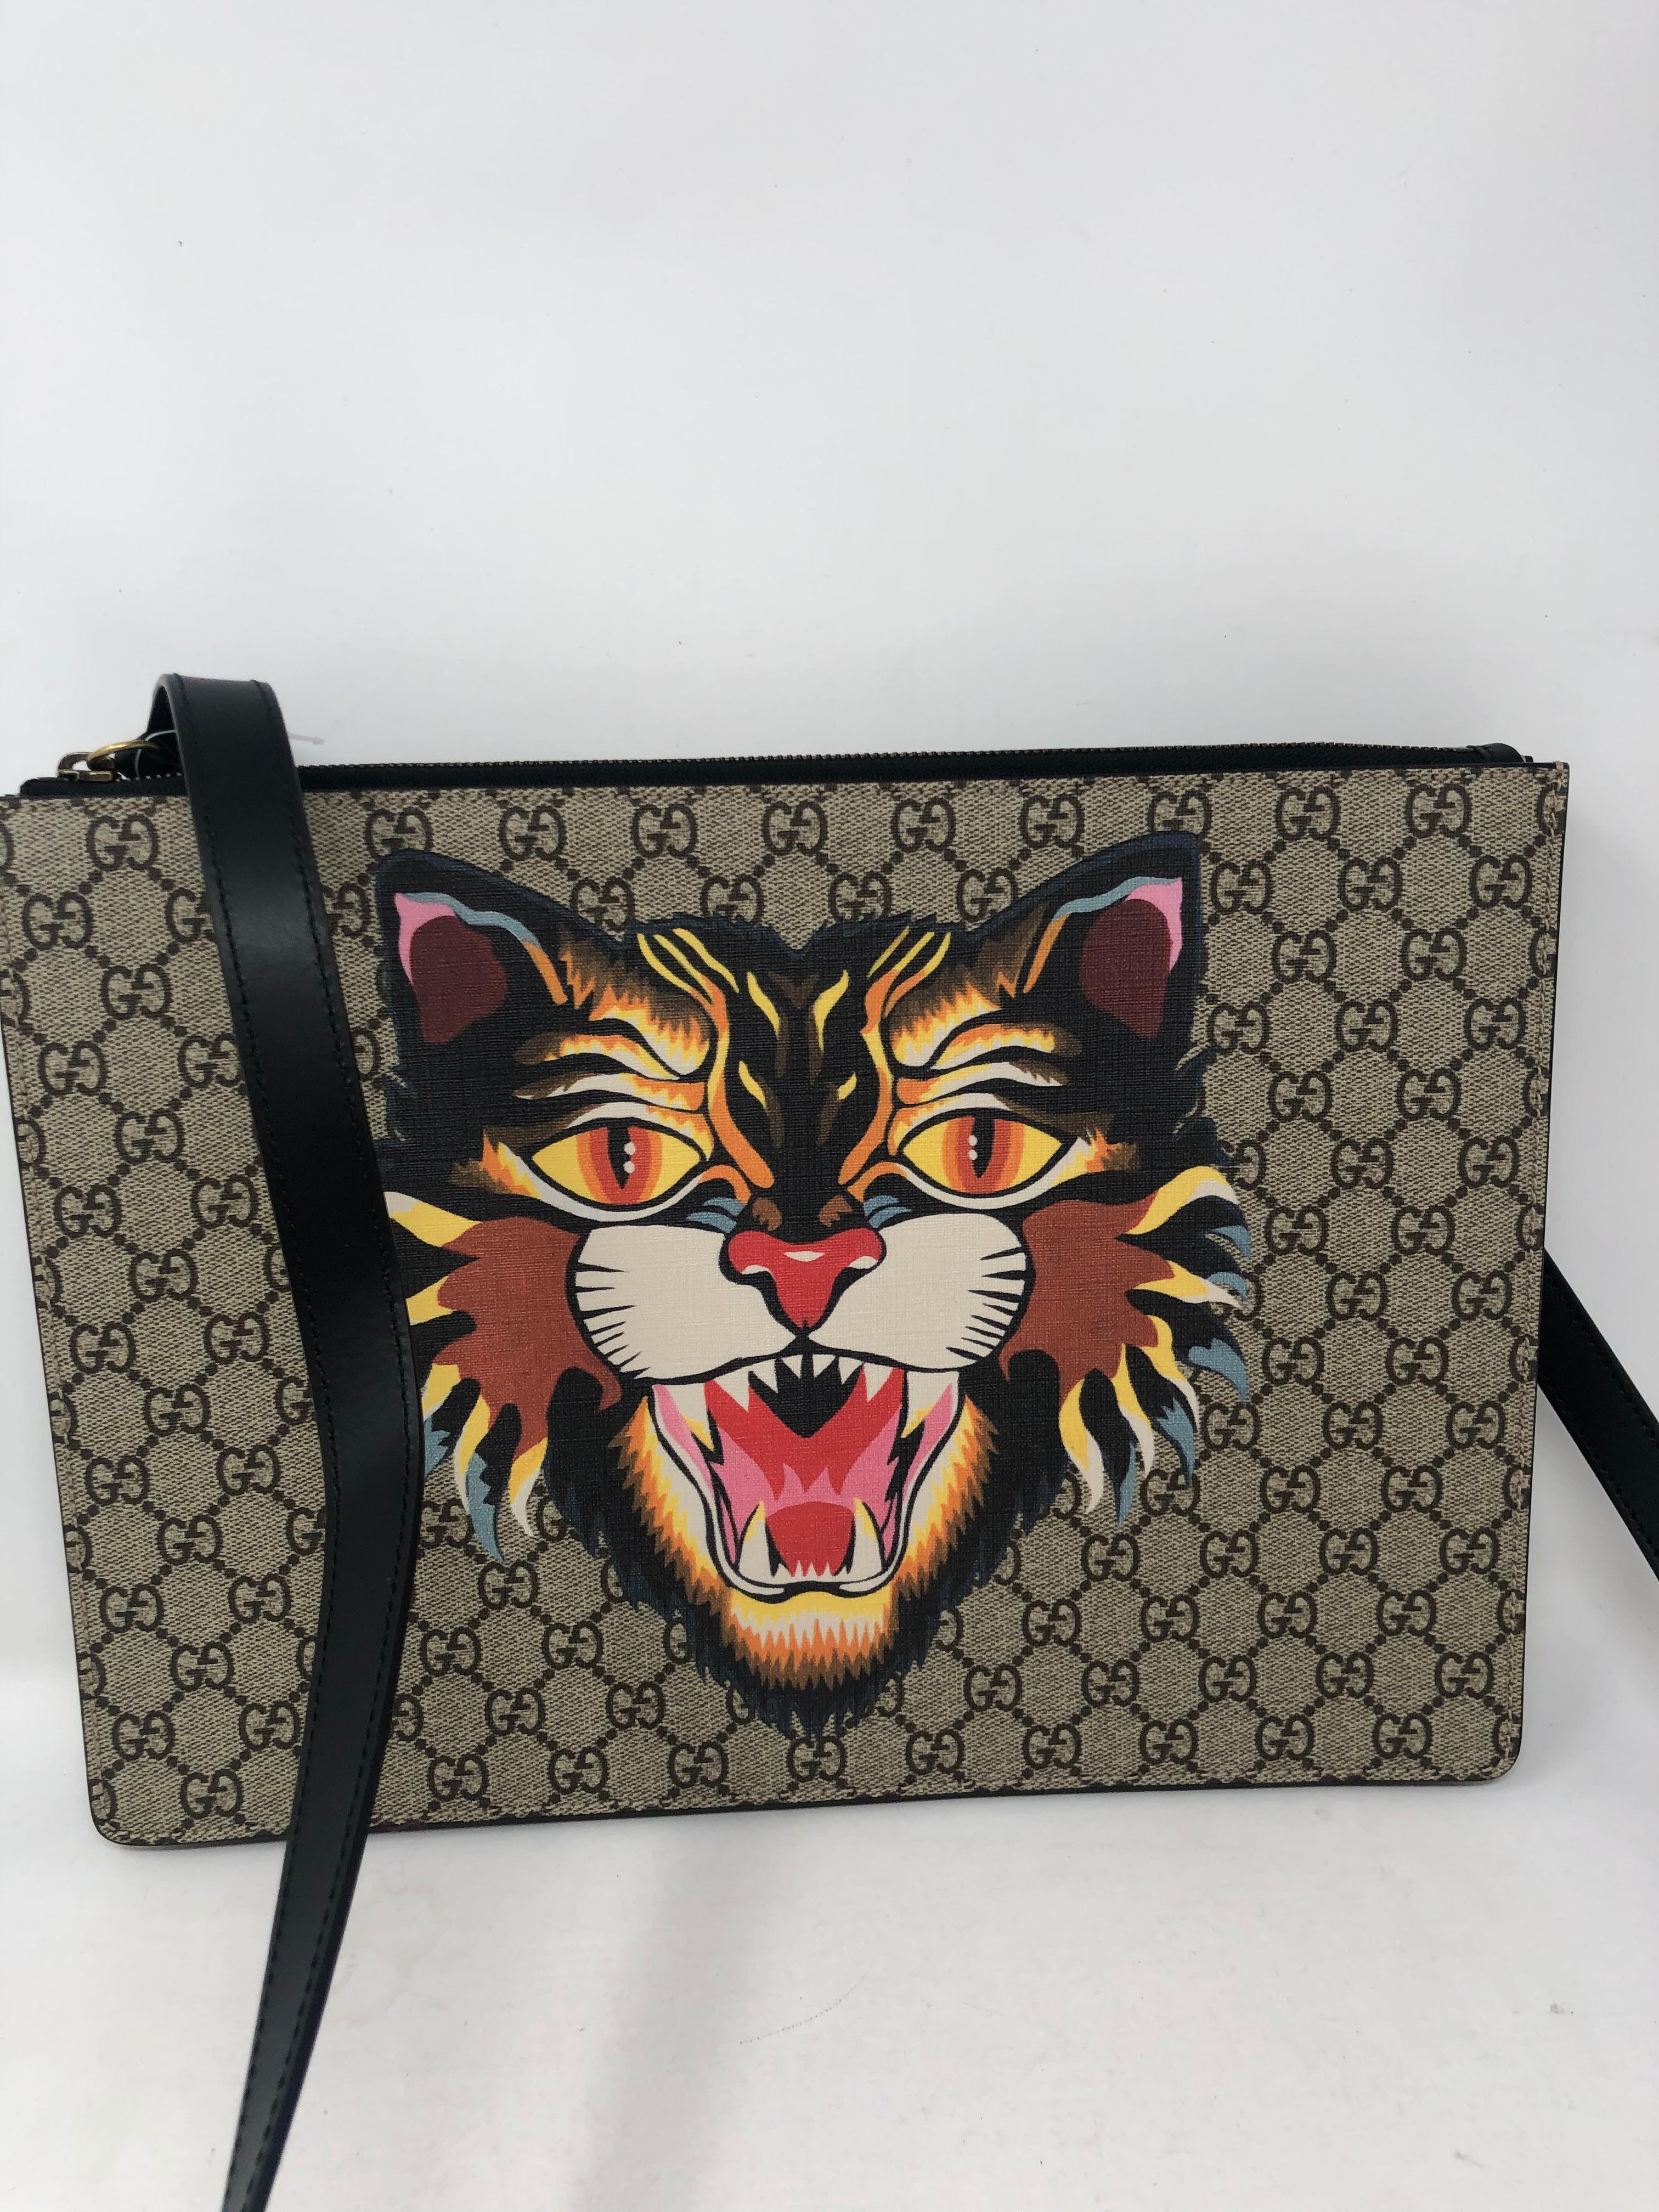 Gucci Tiger Clutch and Crossbody Bag. Gucci mono with big Tiger printed on one side. Has detachable leather strap that can taken off. Worn as a big clutch or laptop holder. New condition. Clean interior. Never used. Guaranteed authentic.